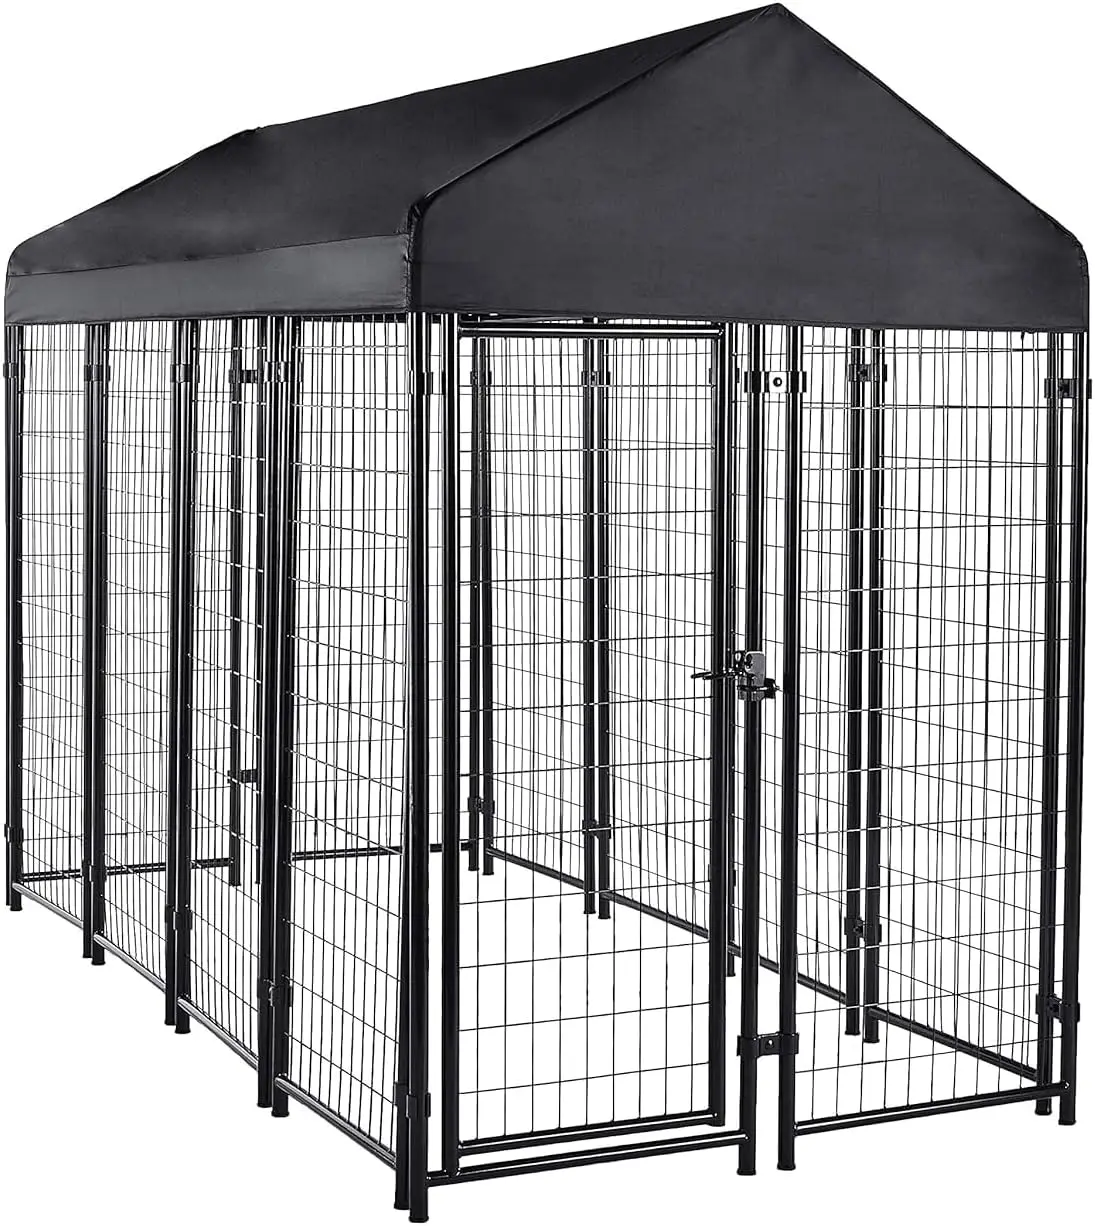 

Welded Rectangular Outdoor Secure Wire Crate Kennel for Cat, Dog Large, Black, 102 x 48 x 72 Inches pet supplies dog fence